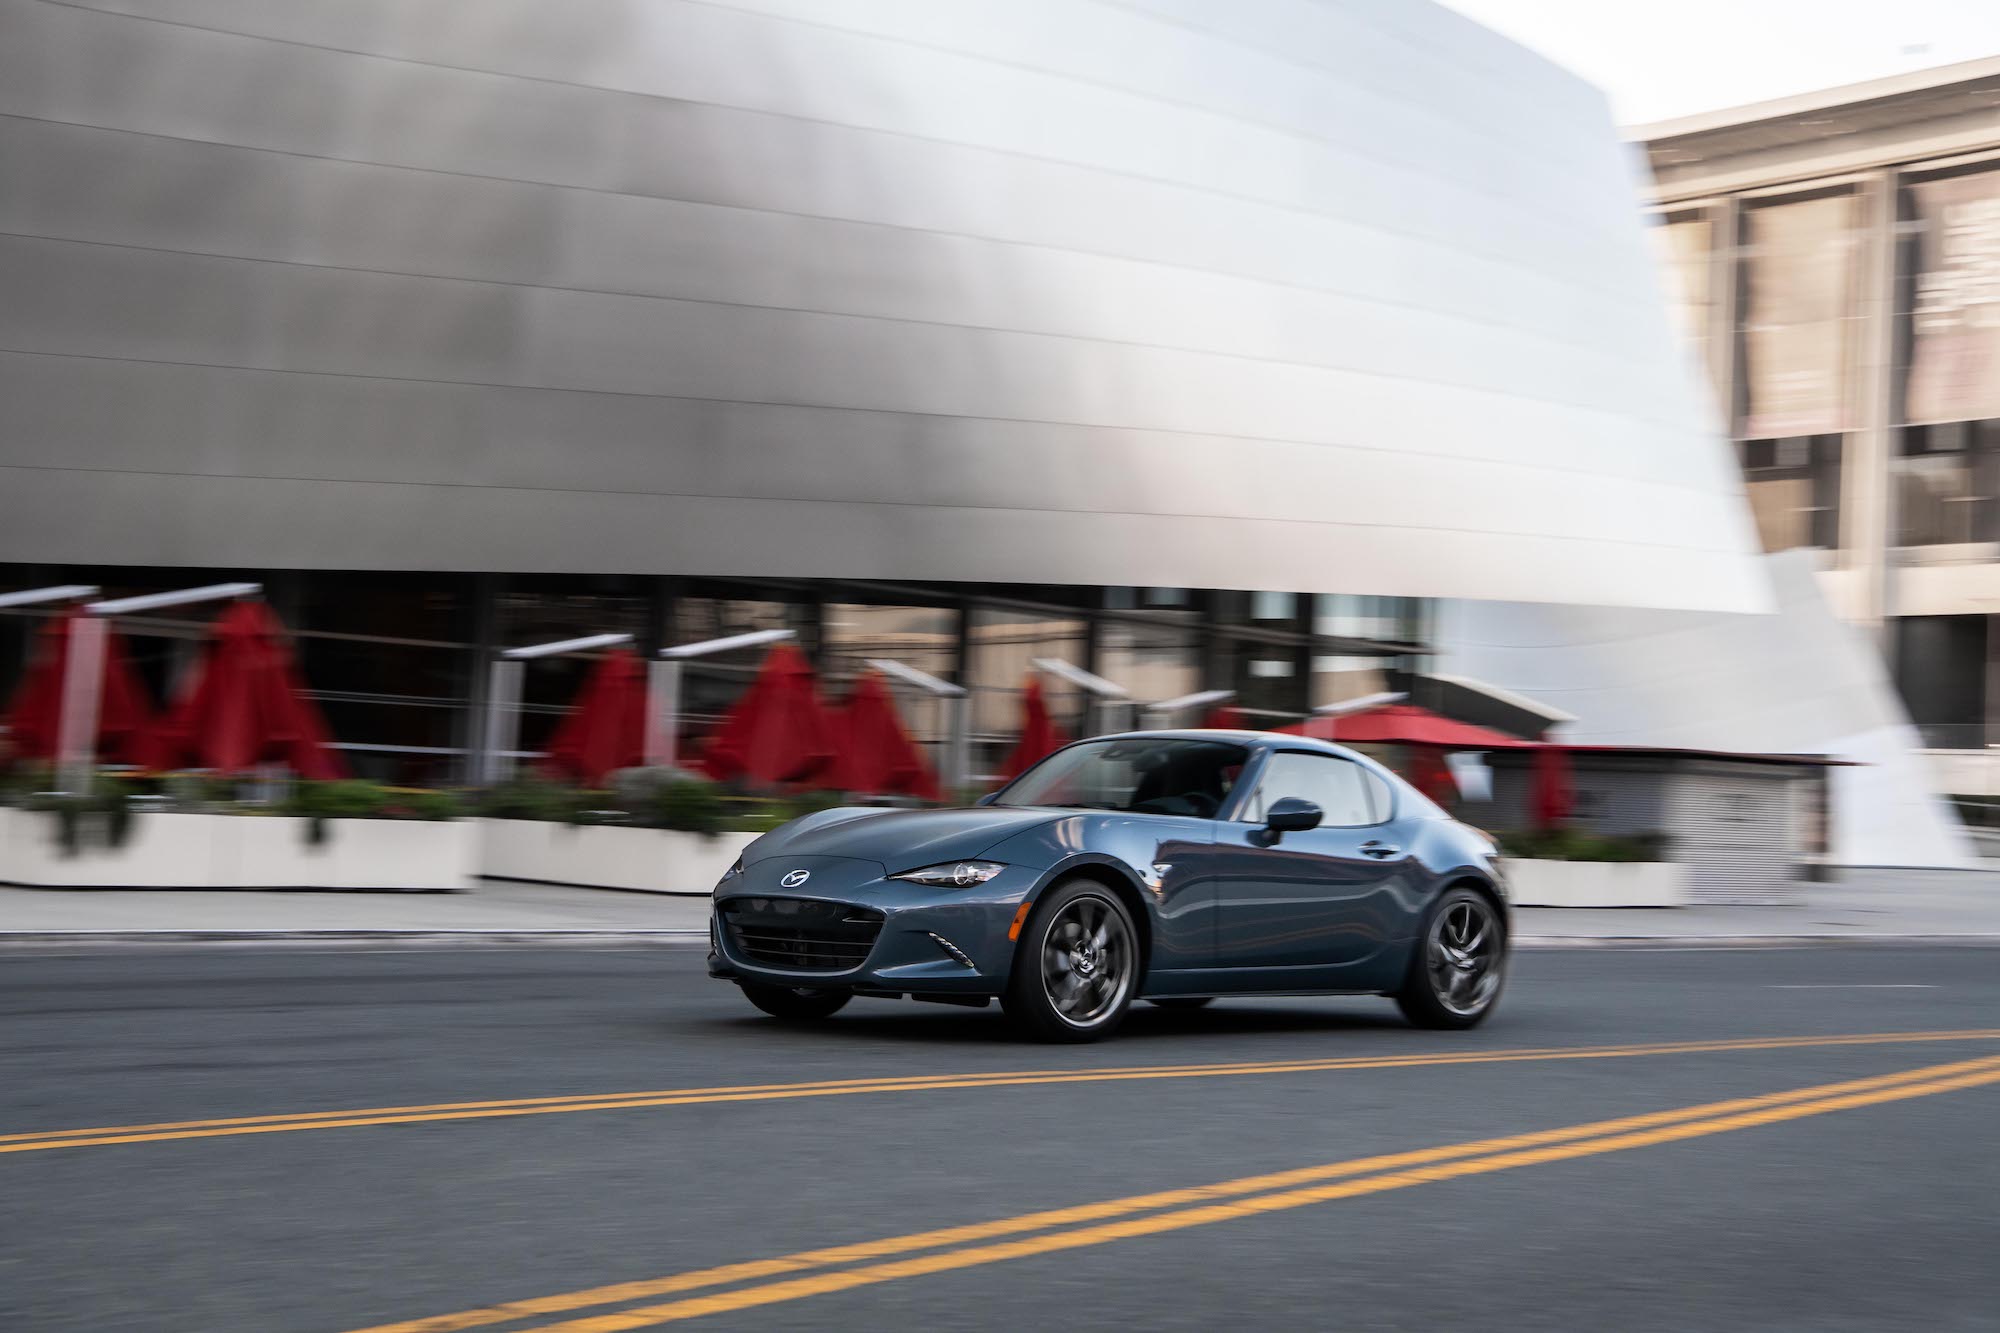 A 2021 Mazda MX-5 Miata RF sports car, with Polymetal Gray exterior paint, travels past a silver city building